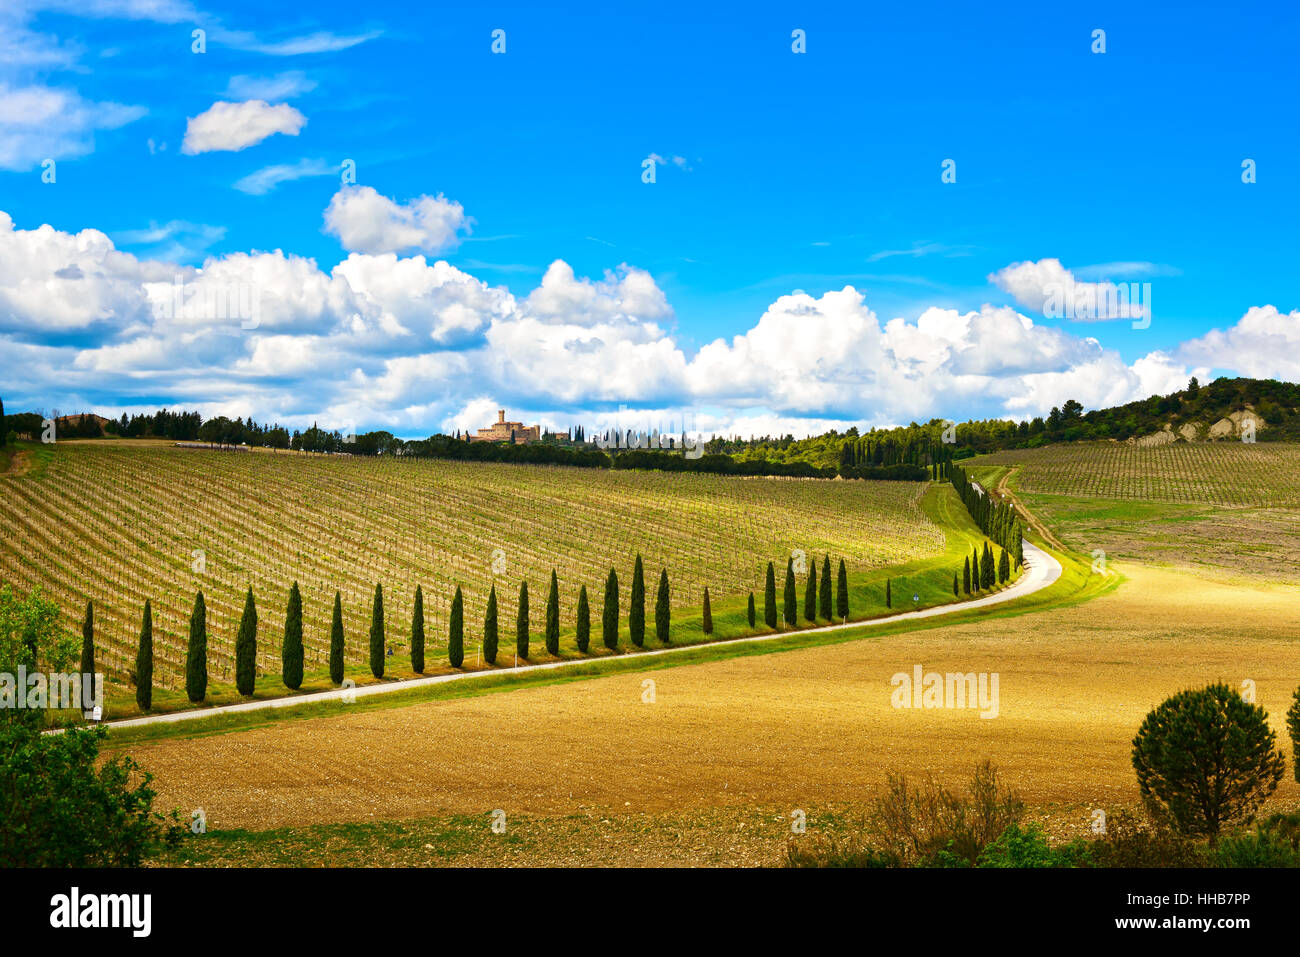 Vineyard, cypress Trees rows and road in a rural landscape in val d Orcia land near Siena, Tuscany, Italy, Europe. Stock Photo